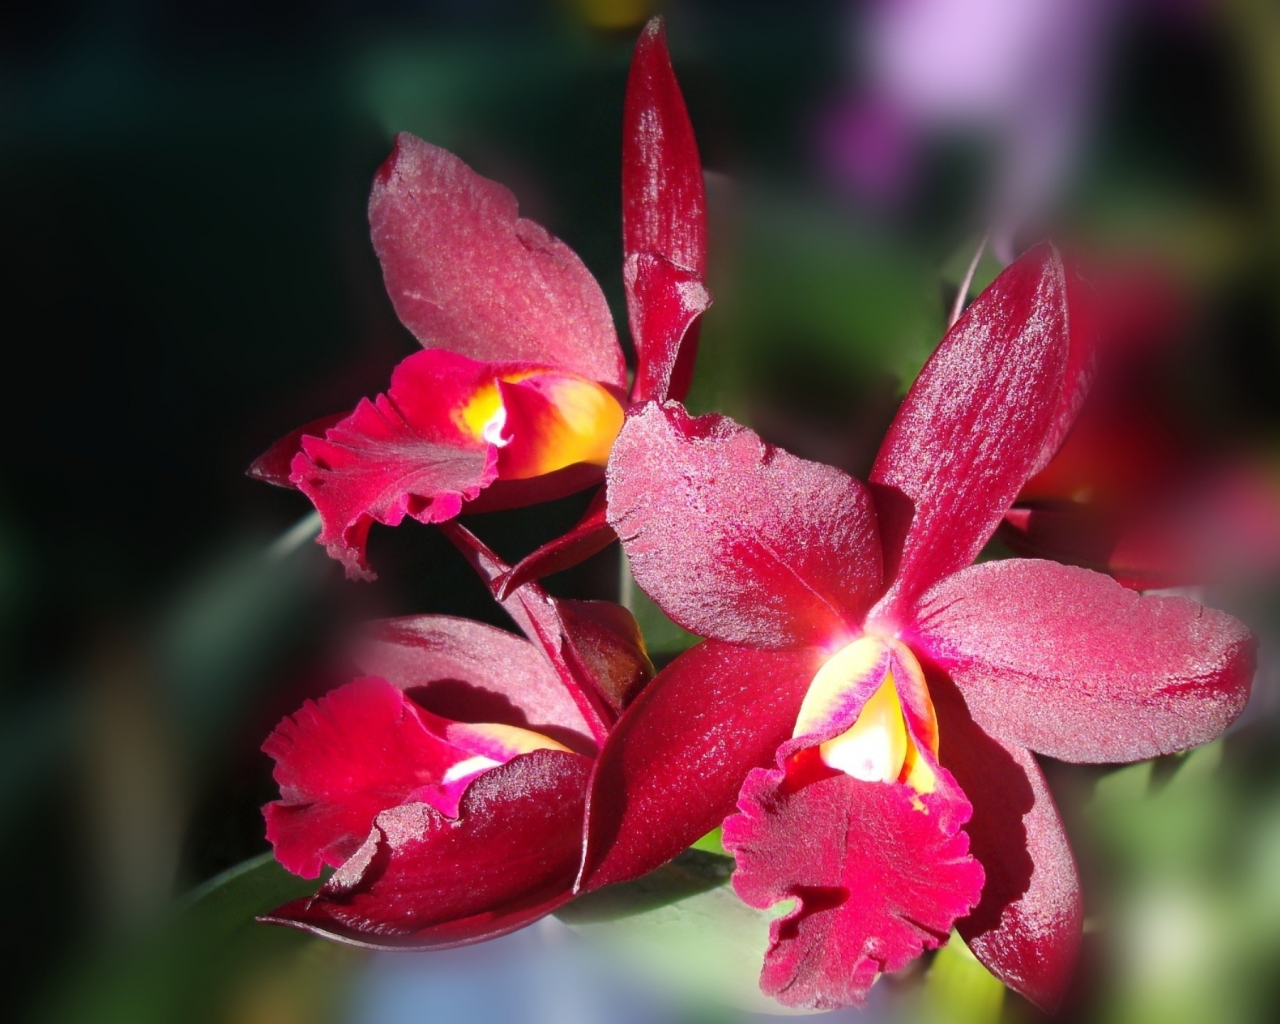 цветы, orchid, forest, макро, тёмно-красная, flowers, beautiful nature wallpapers, лес, american orchid society, красота, dark red, орхидея